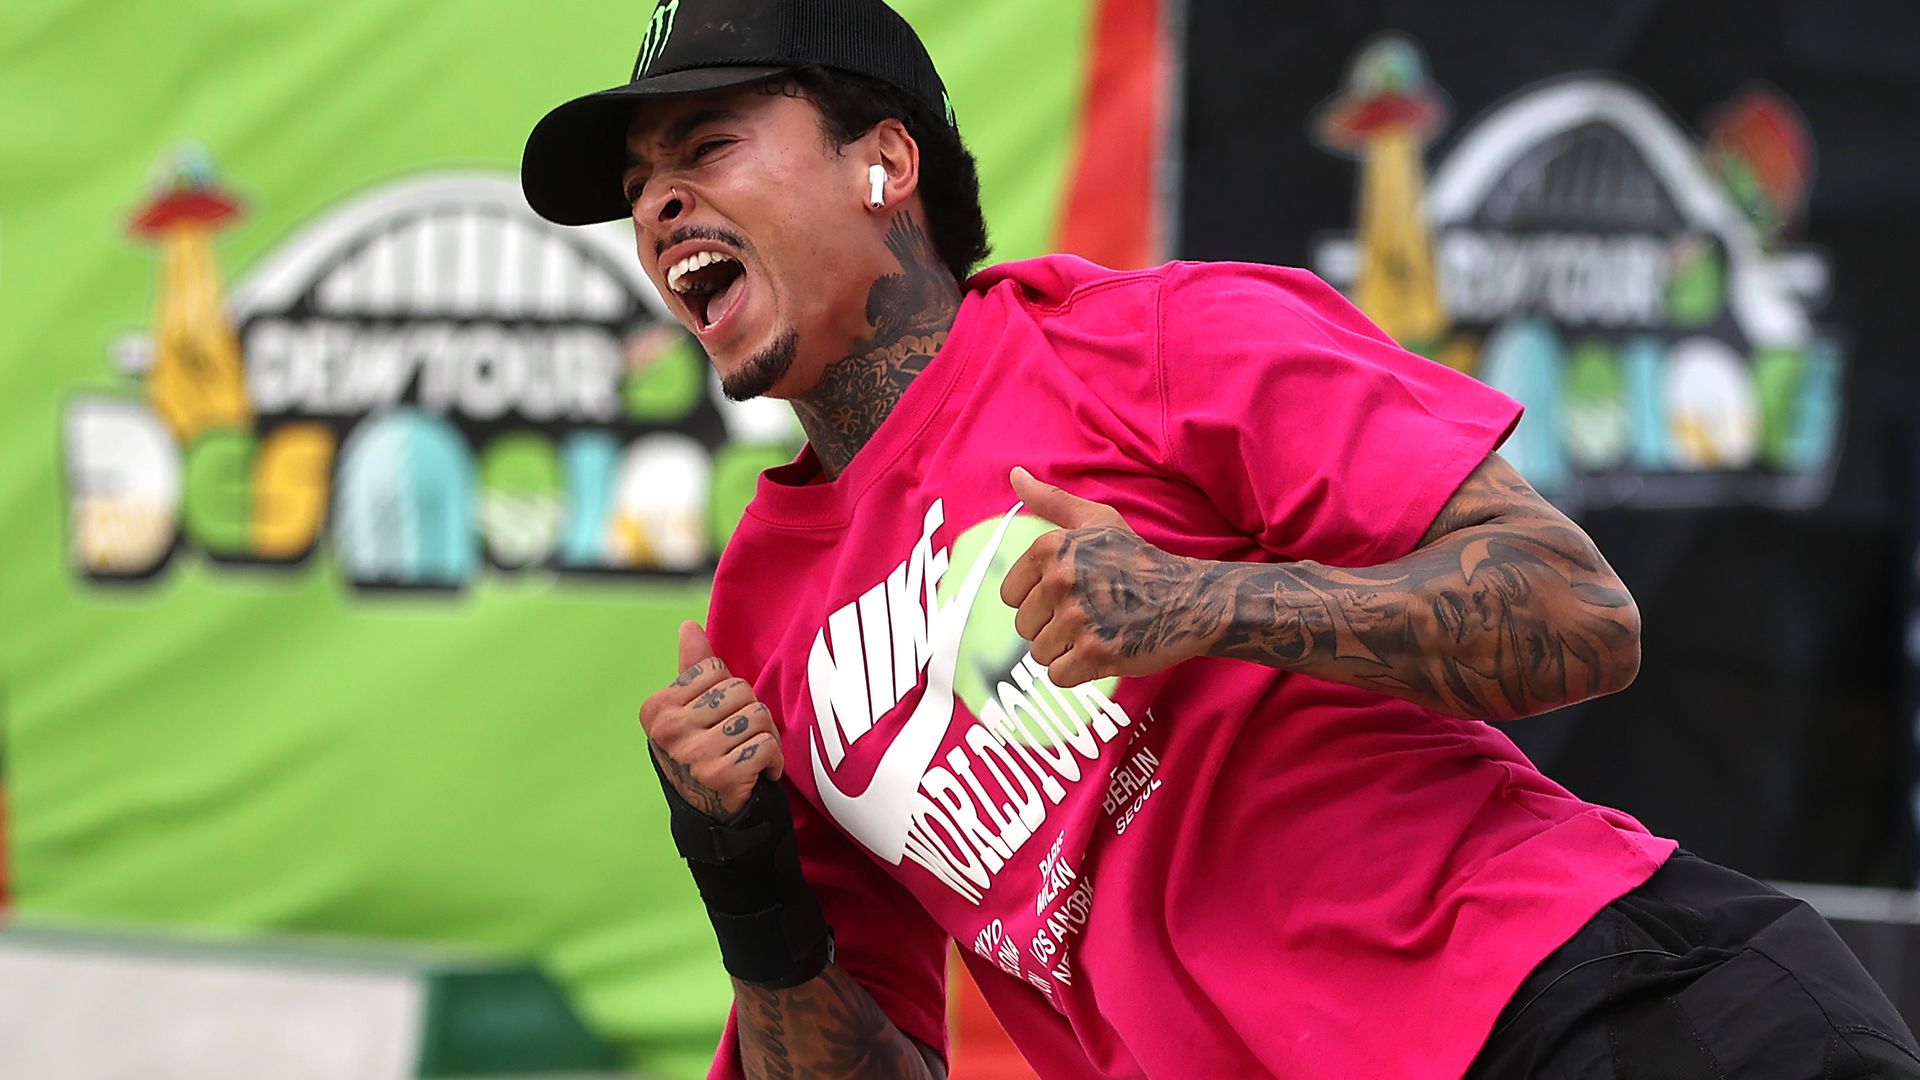 Nyjah Huston reacts after finishing first place in the Men's Street Final at the Dew Tour on May 23, 2021 in Des Moines, Iowa. 